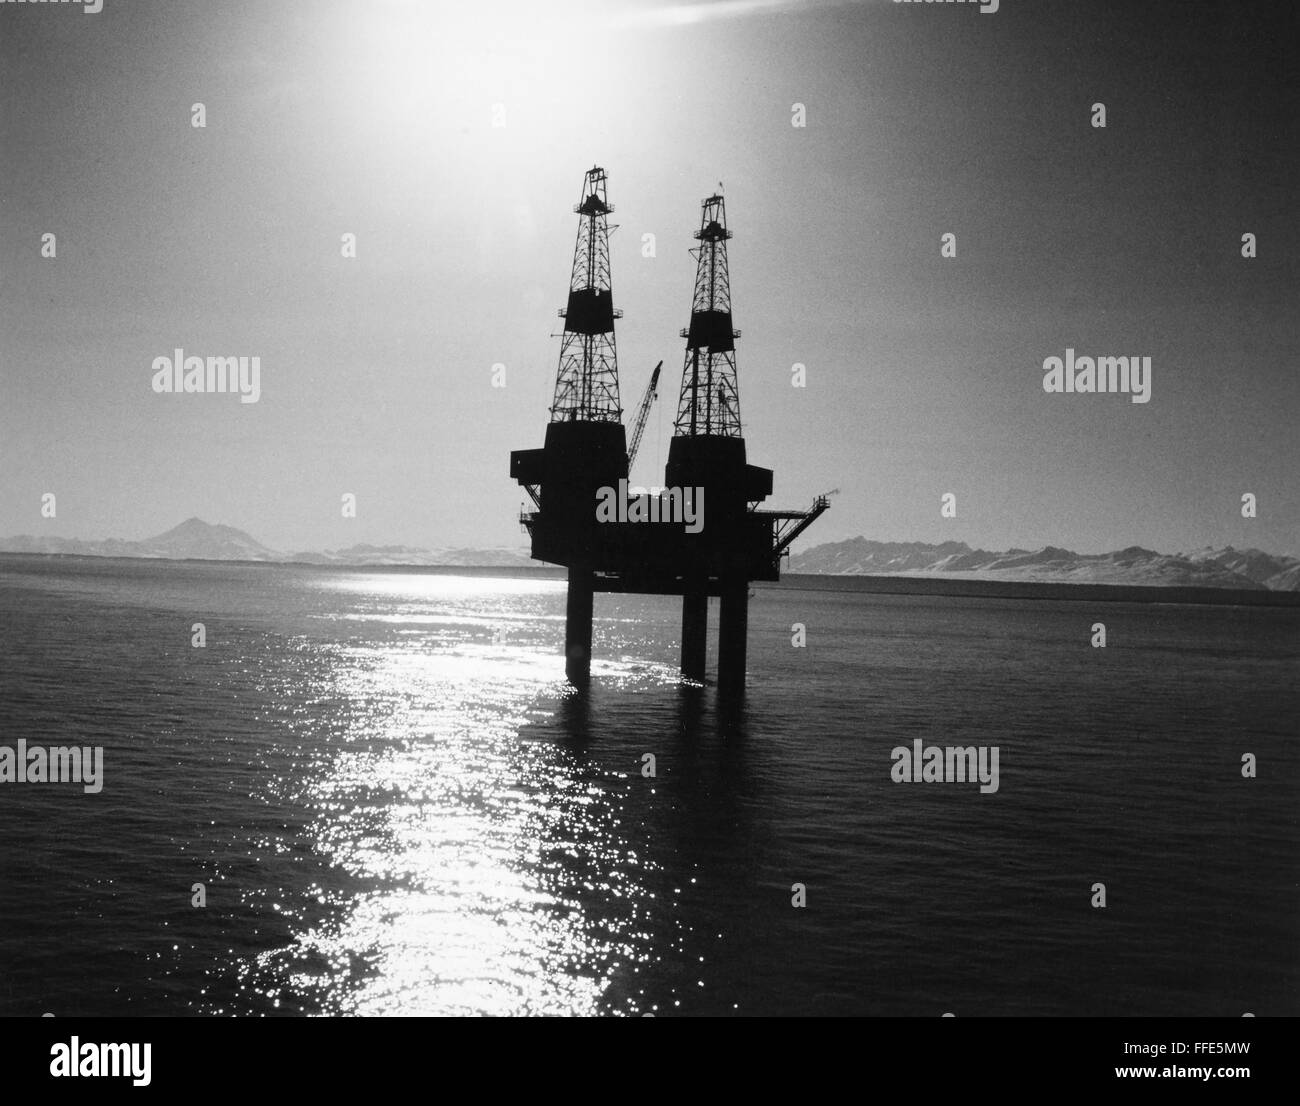 ALASKA: OIL RIG, 1960s. /nA Texaco offshore oil platform in Cook Inlet on Alaska's southern coast, late 1960s. Stock Photo